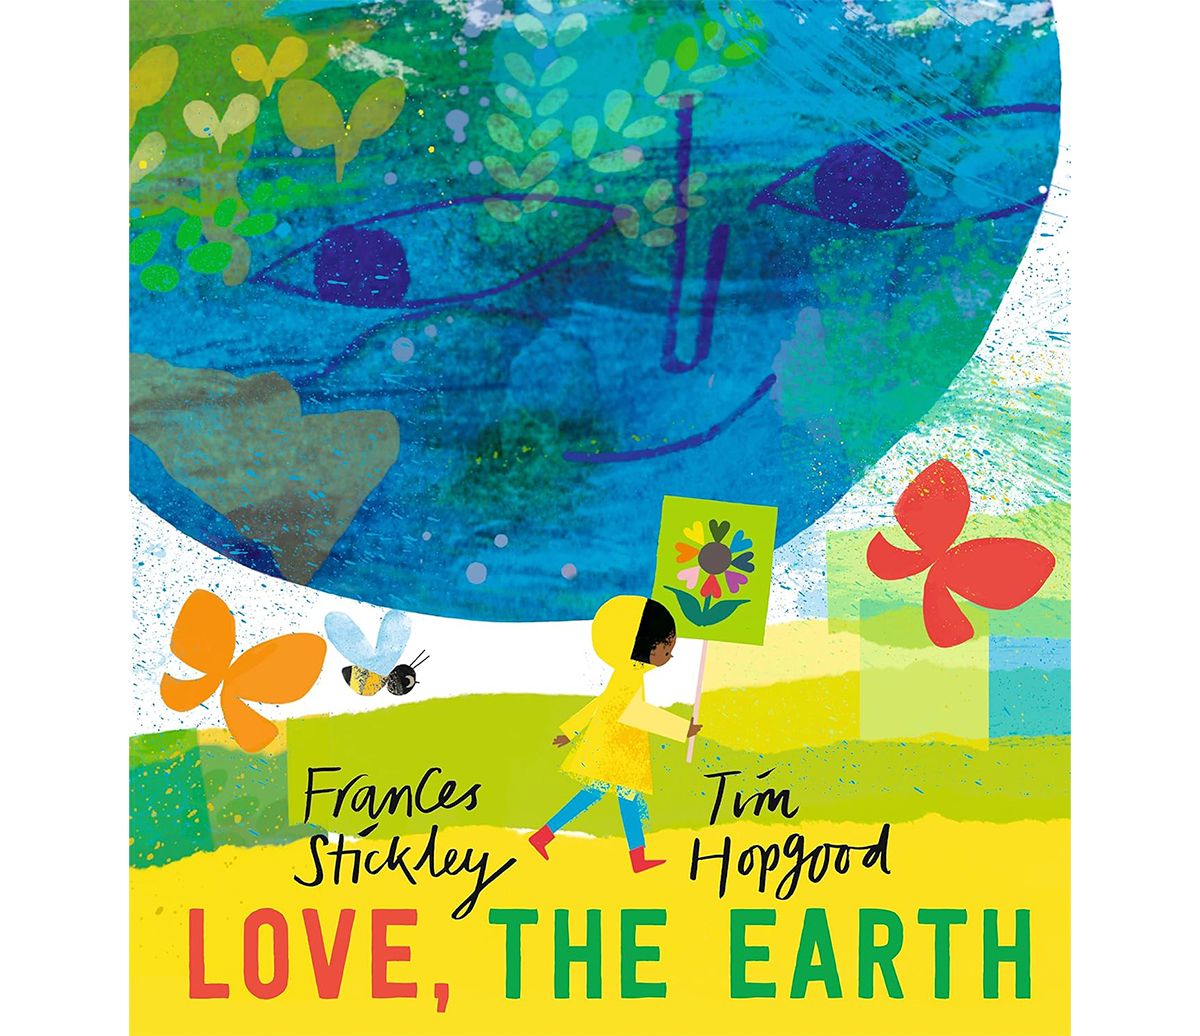 frances-stickley-love-the-earth.png